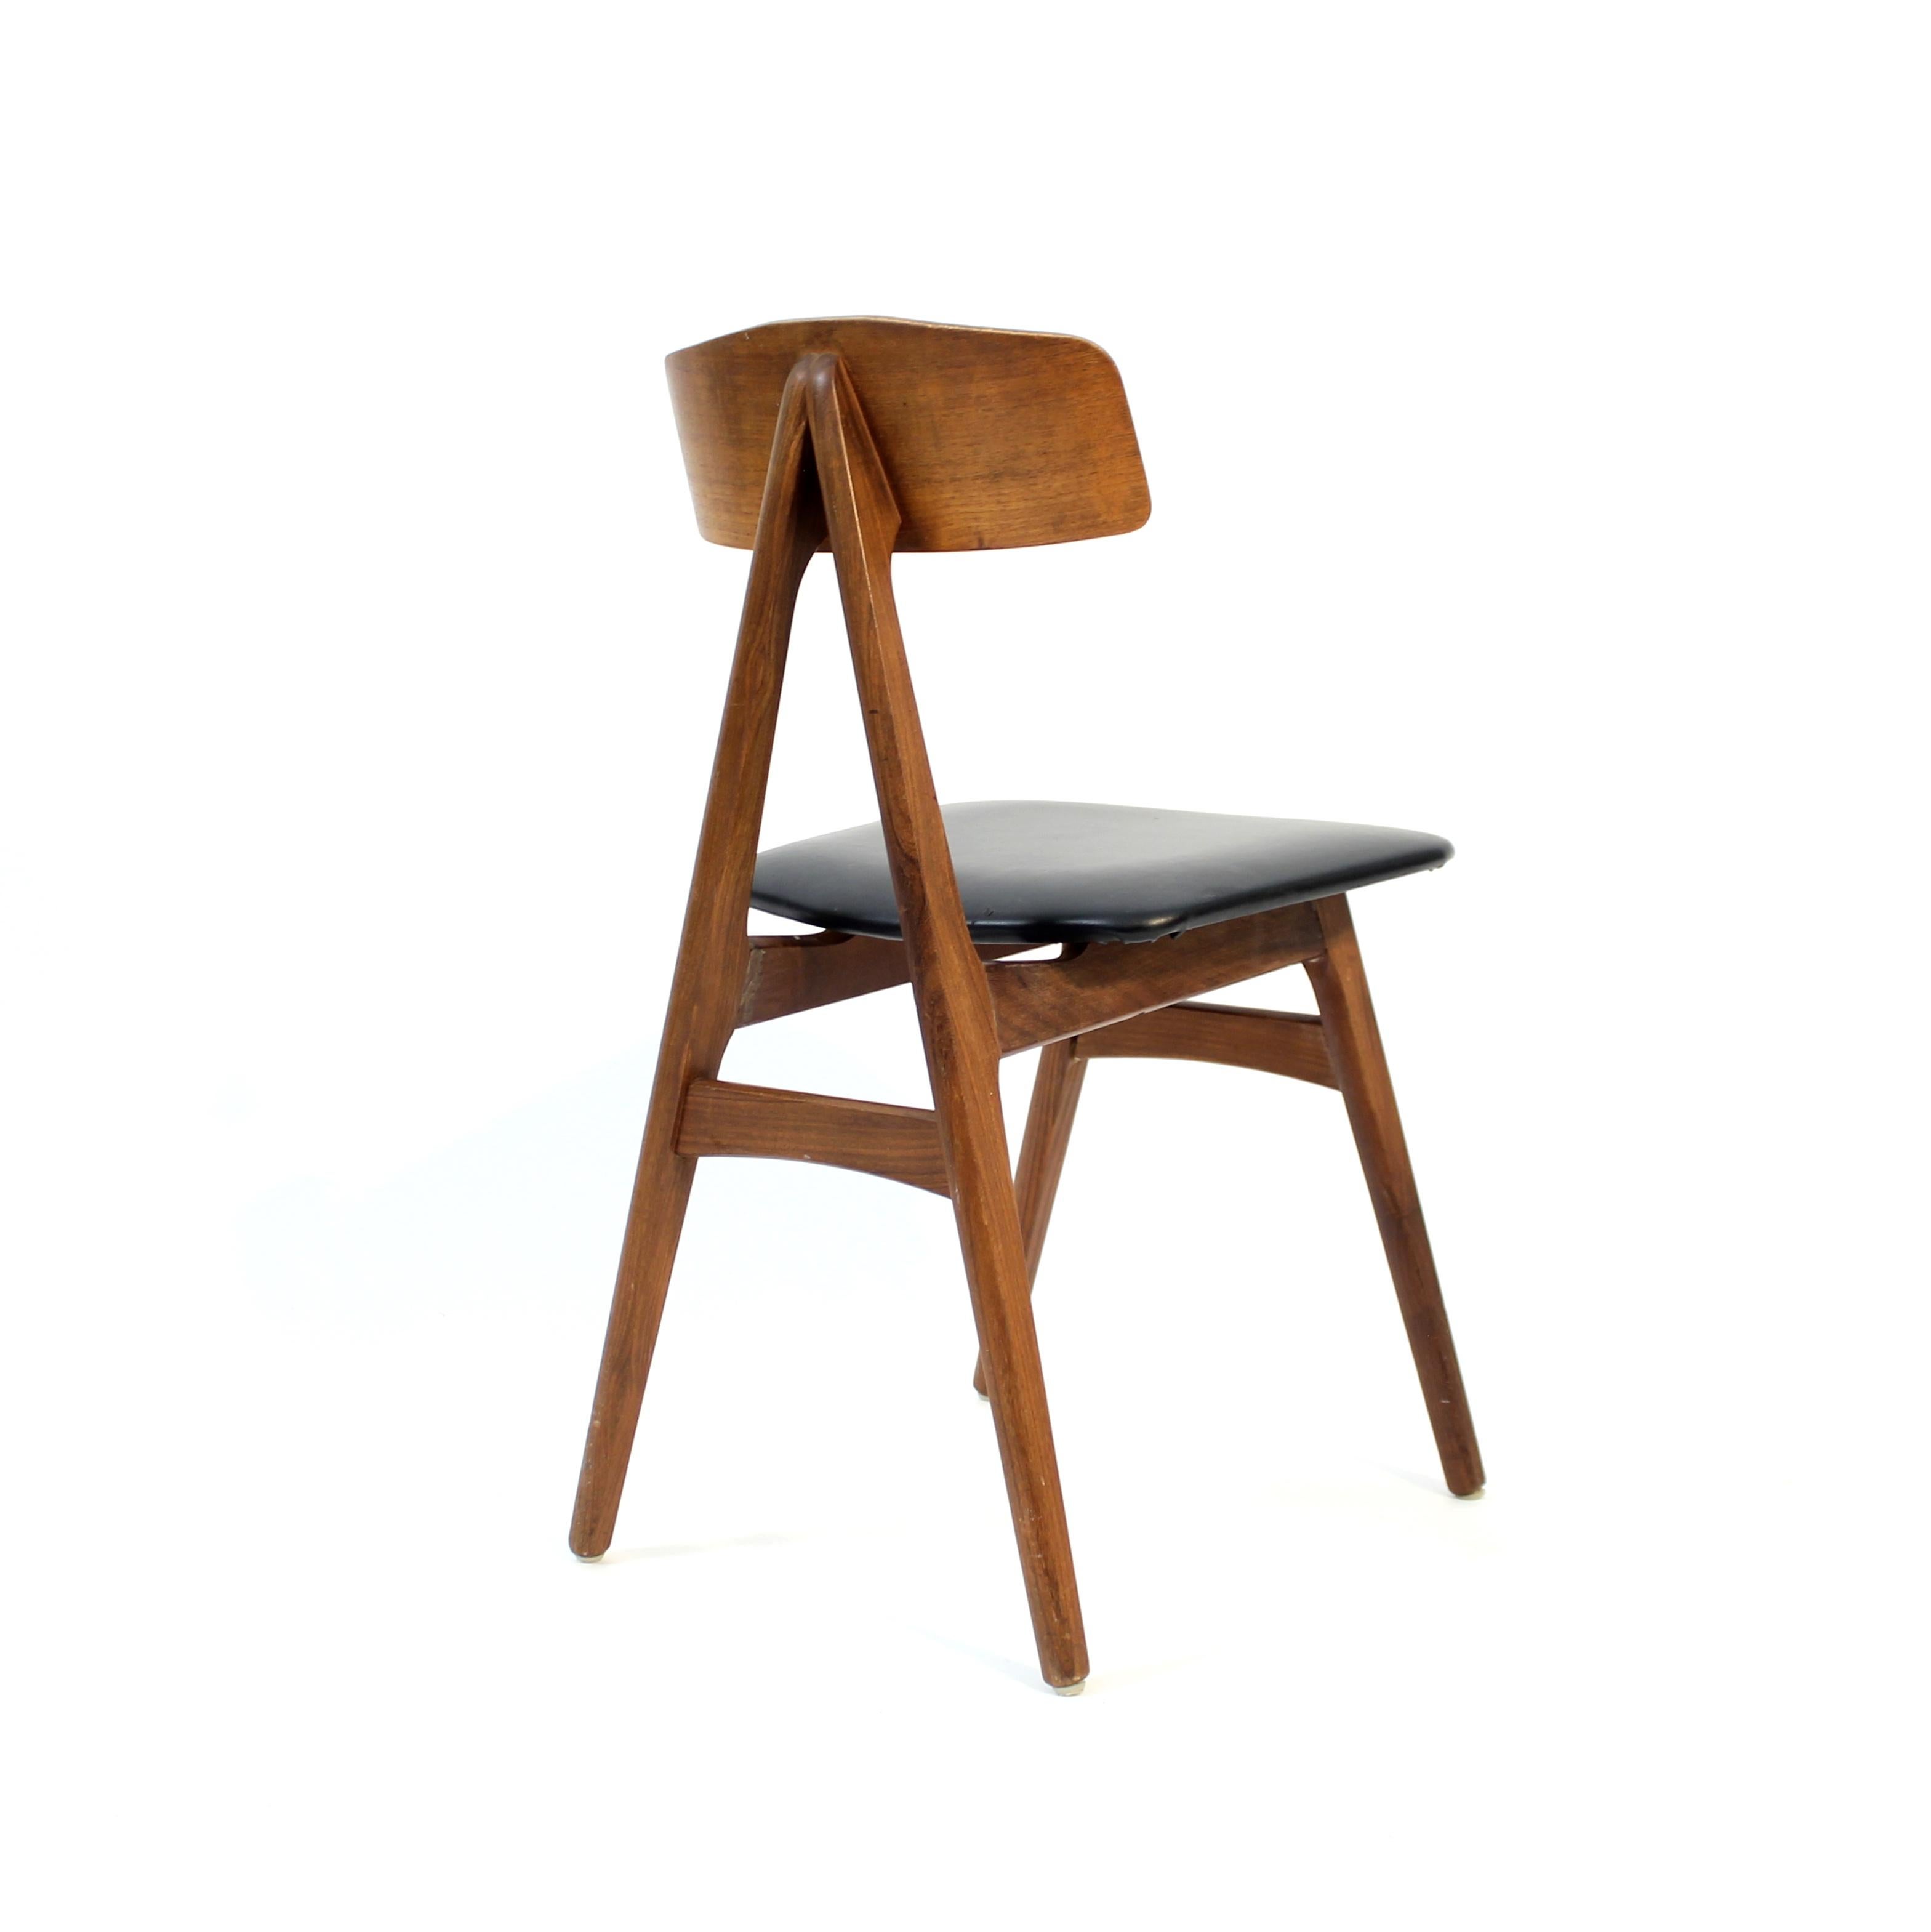 Faux Leather Bengt Ruda, Nizza teak chair for IKEA, 1959 For Sale